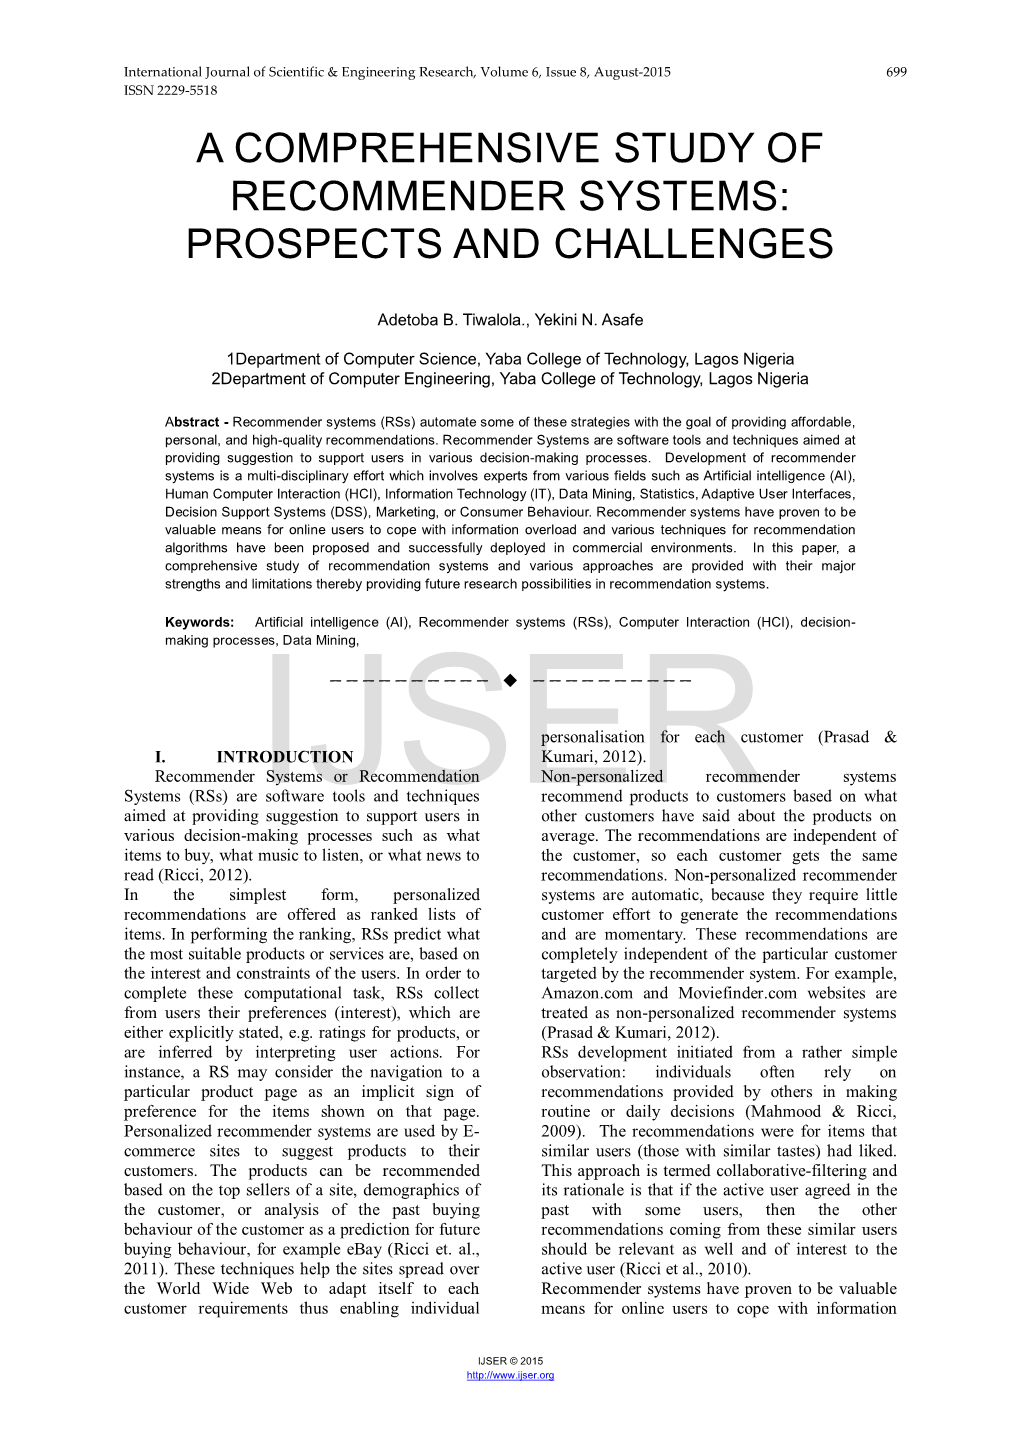 A Comprehensive Study of Recommender Systems: Prospects and Challenges